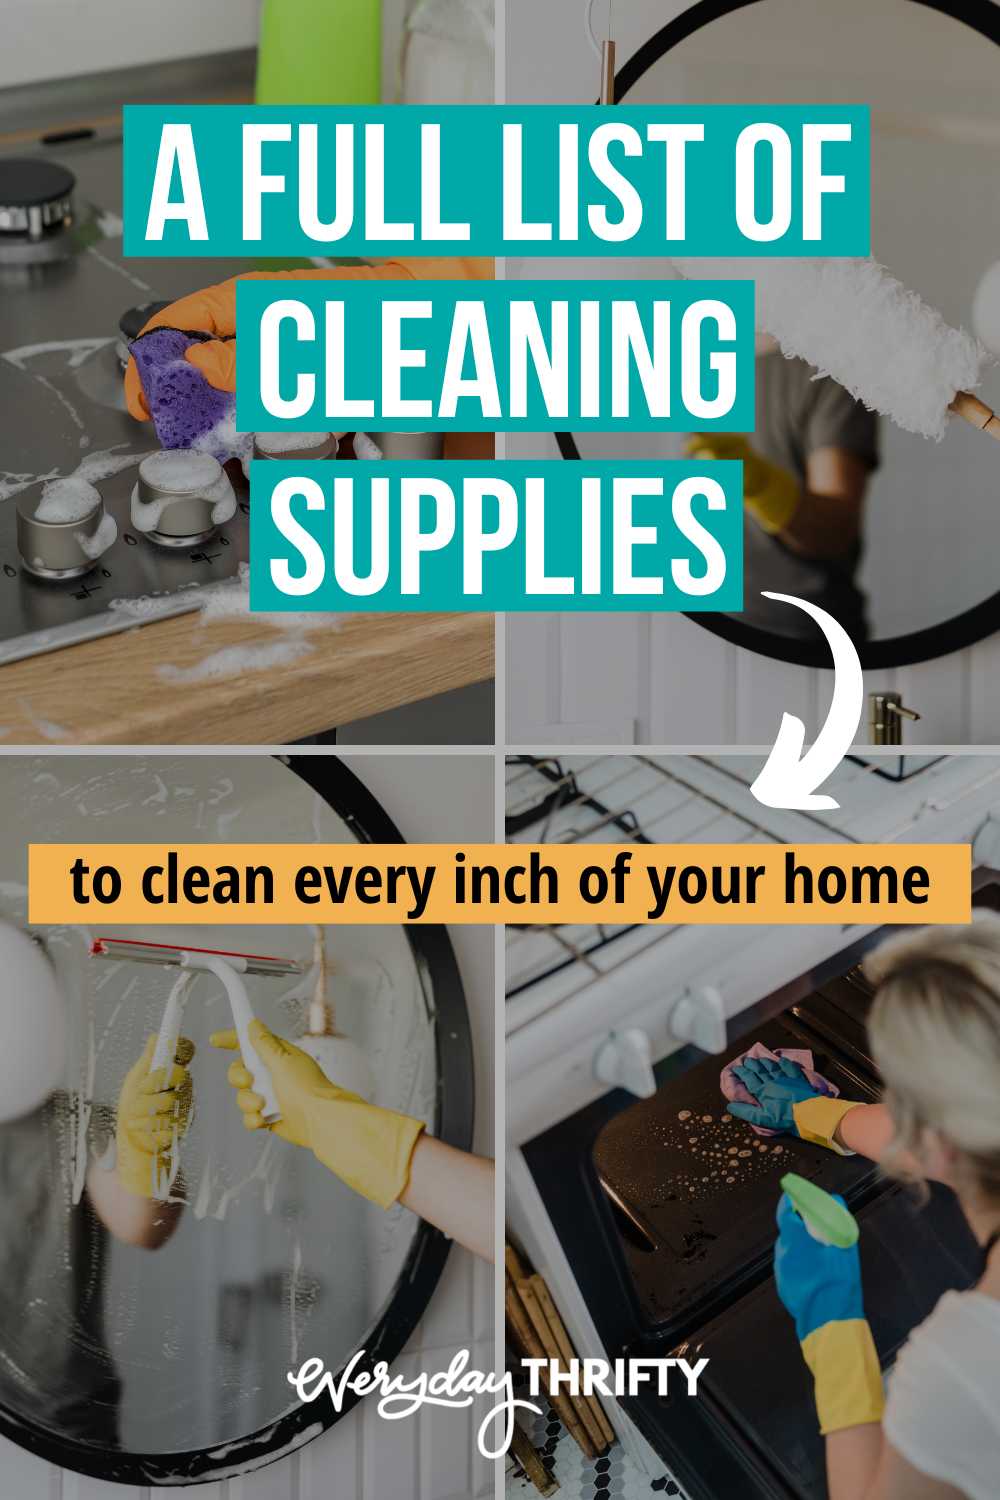 https://everydaythrifty.com/wp-content/uploads/2023/01/A-Full-List-Of-Cleaning-Supplies-For-Your-Home.jpg